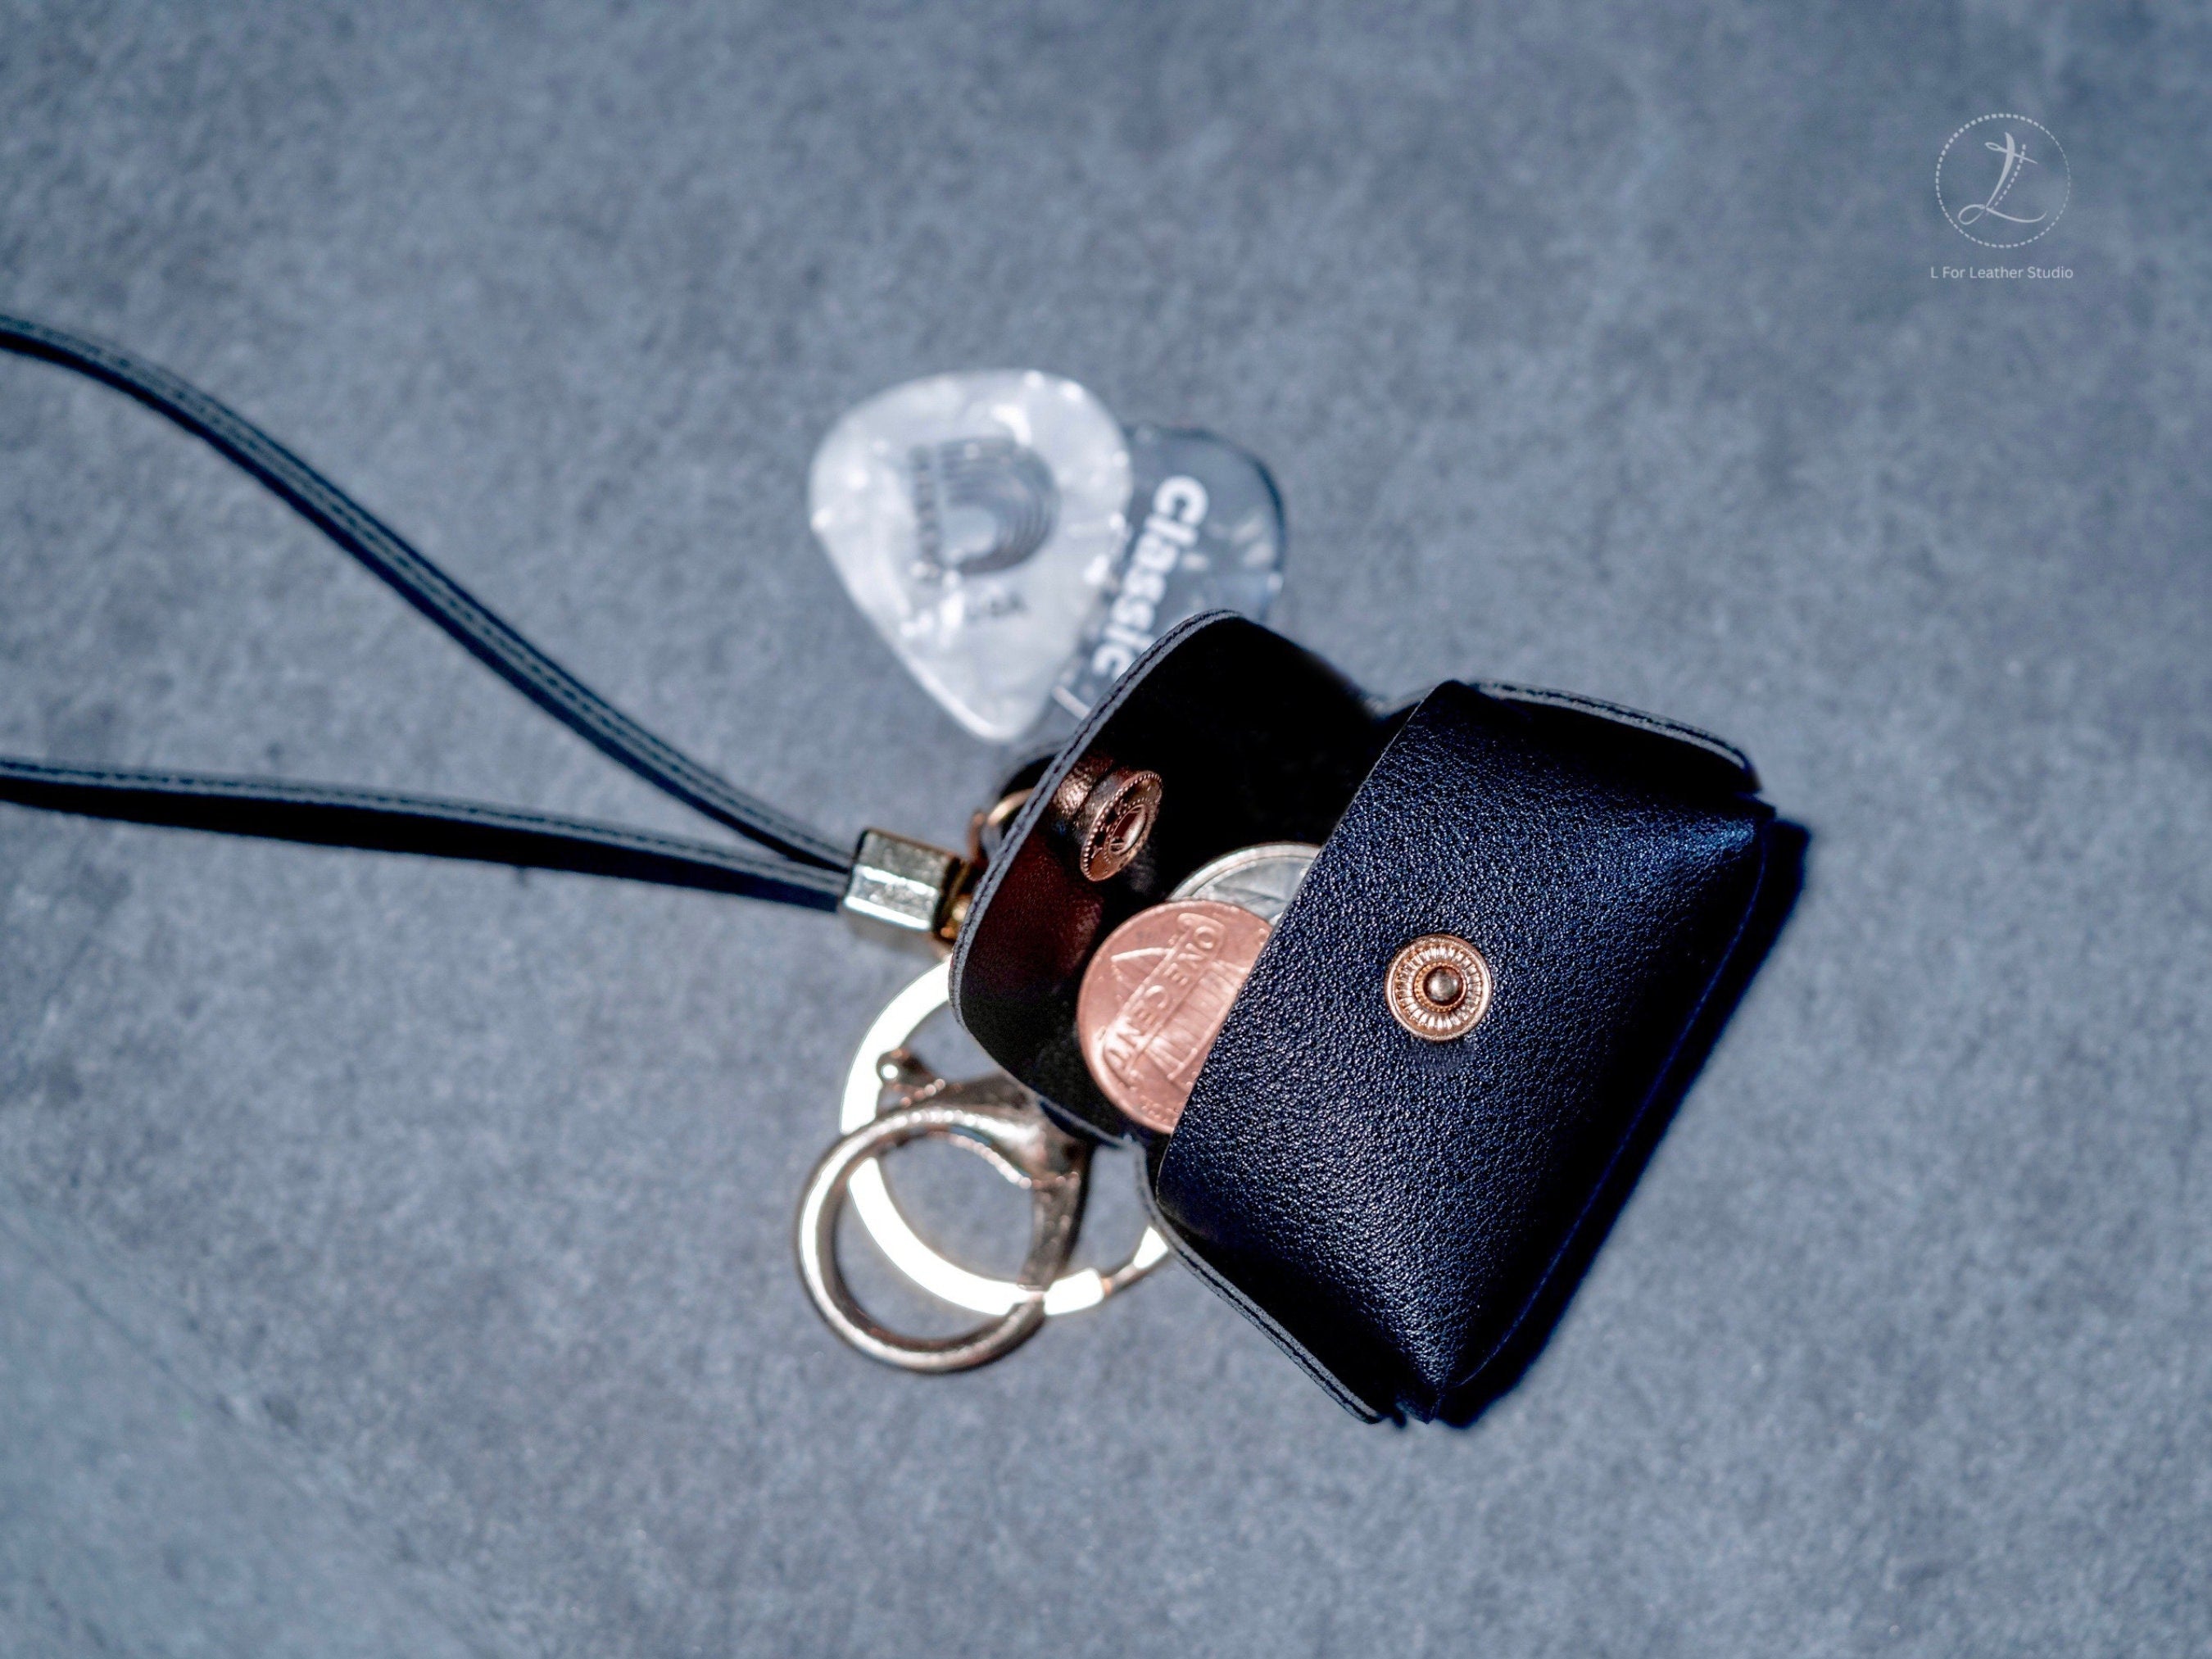 Mini Dumpling Vegan leather coin purse with strap, keyring and lobster claw clasp. Ring pouch, AirTag case, coin bag, small gadgets storage.